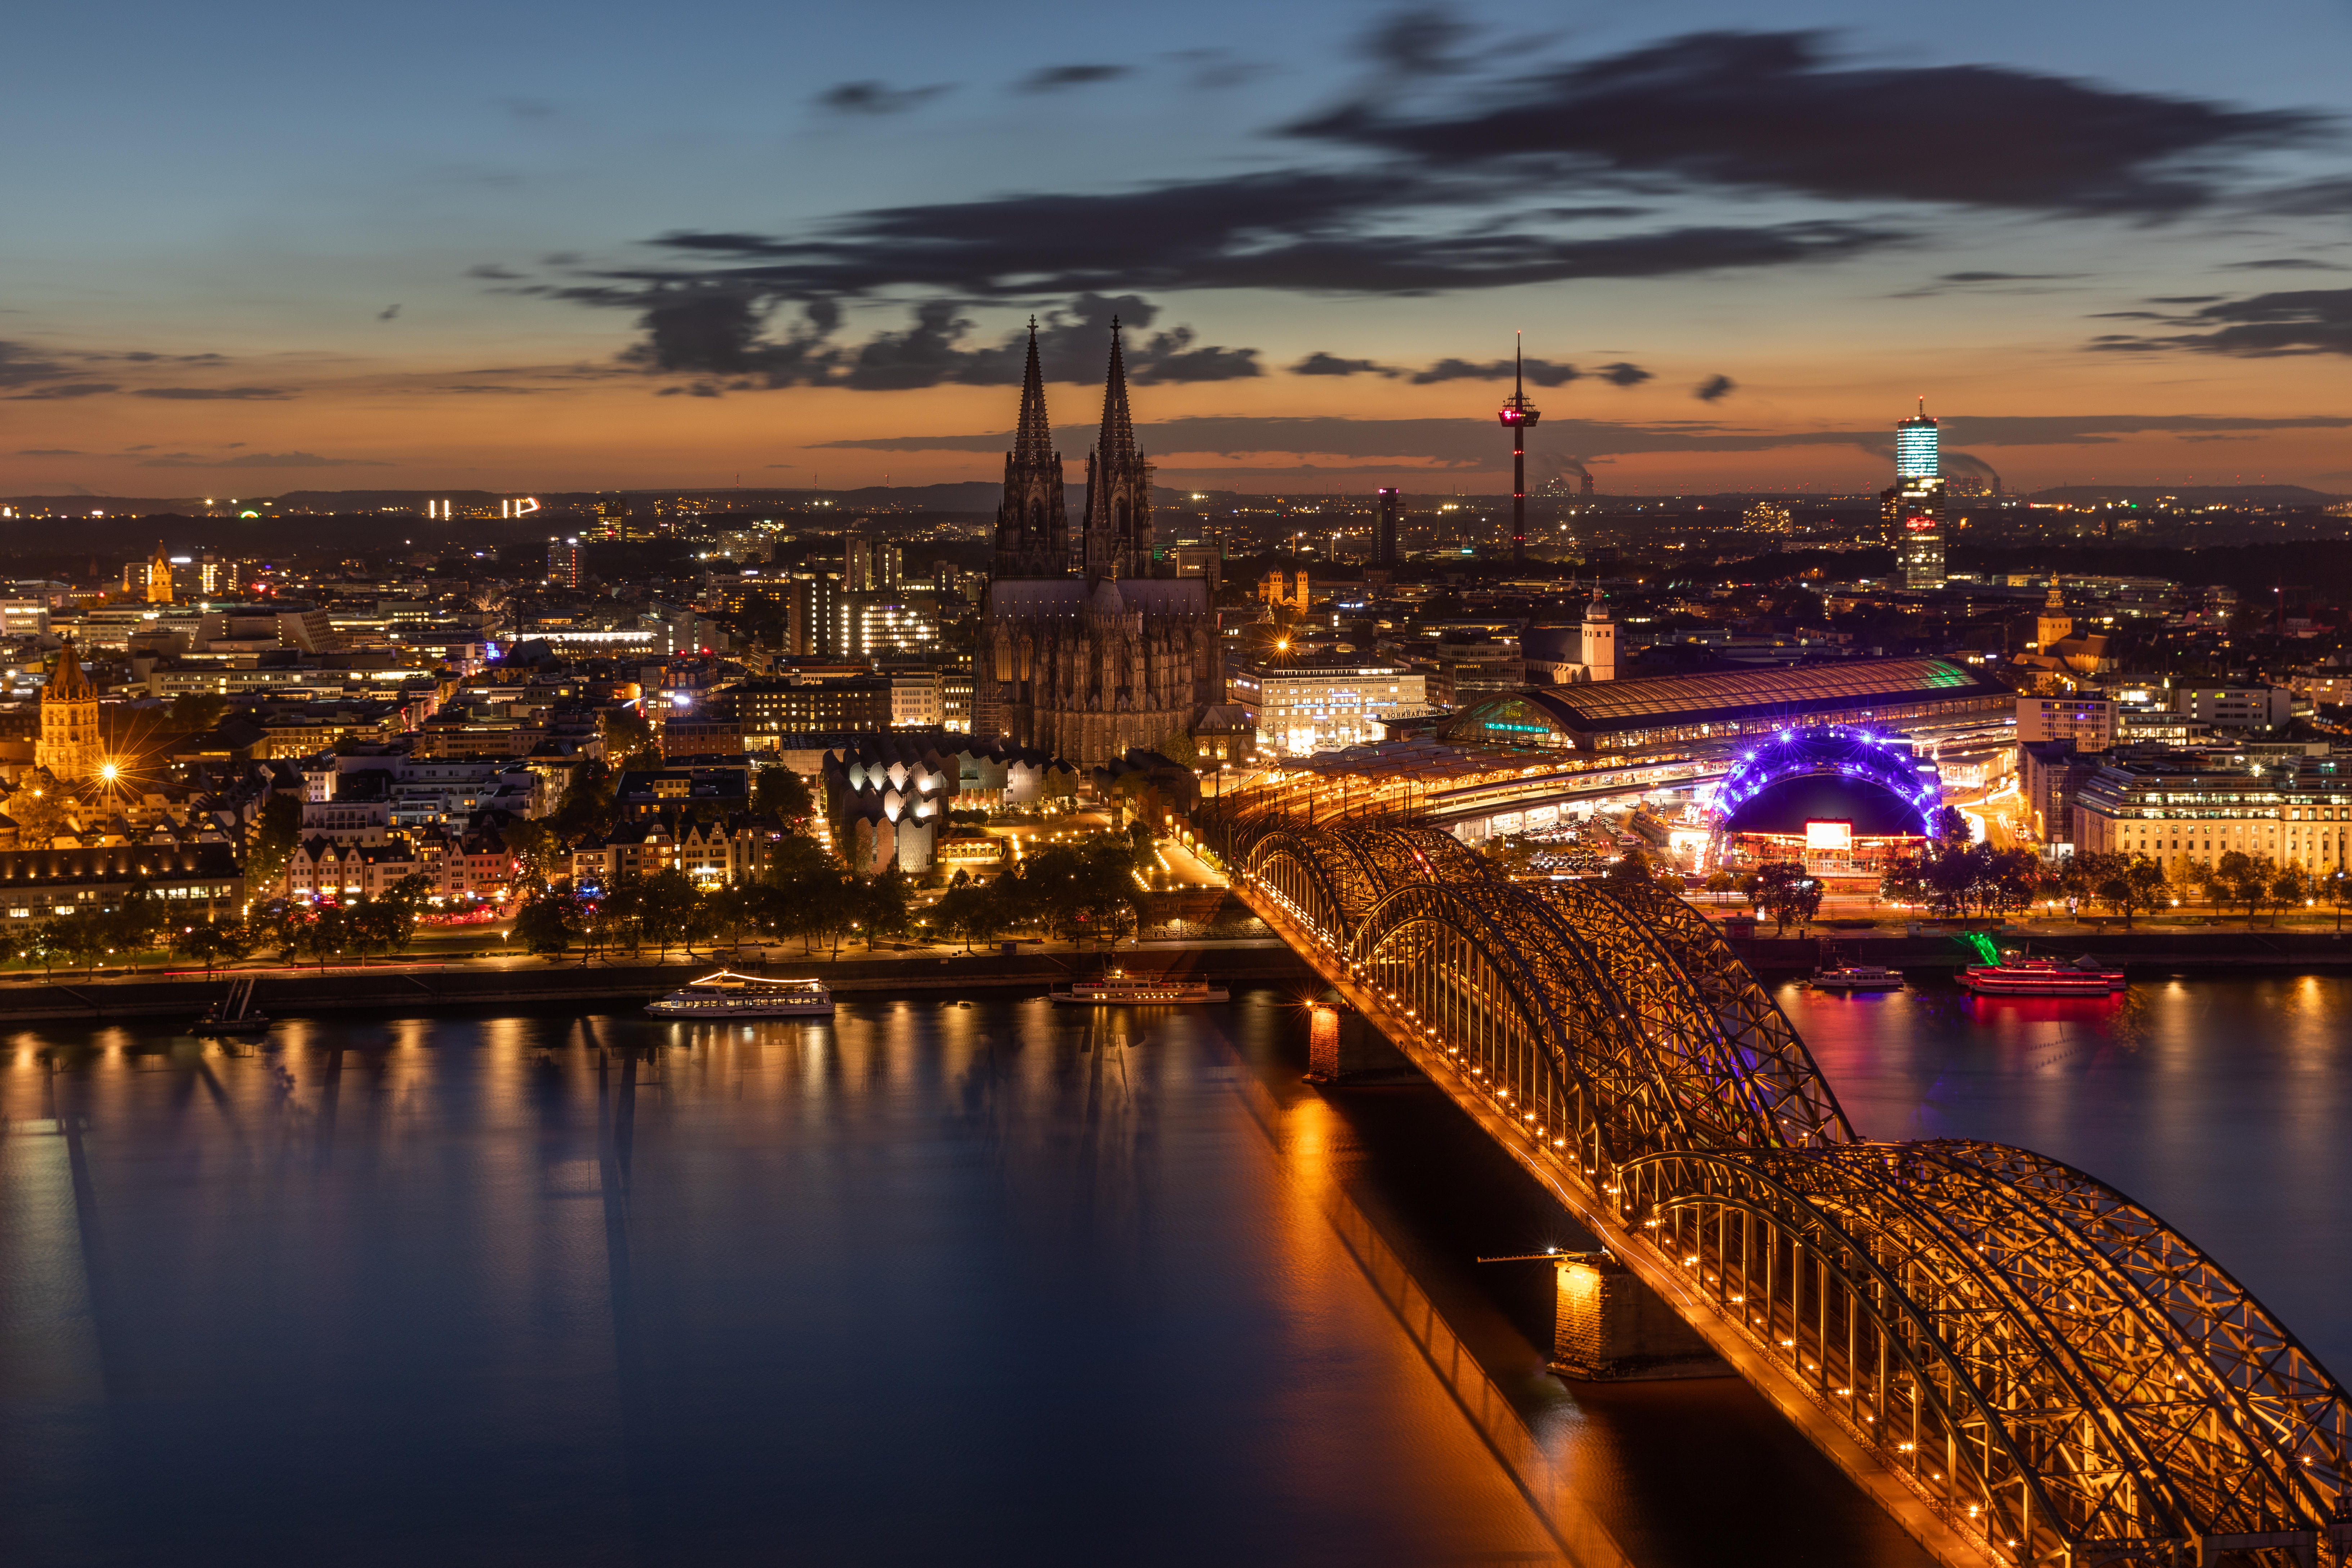 133245 download wallpaper cities, architecture, night city, city lights, bridge, koln, cologne screensavers and pictures for free